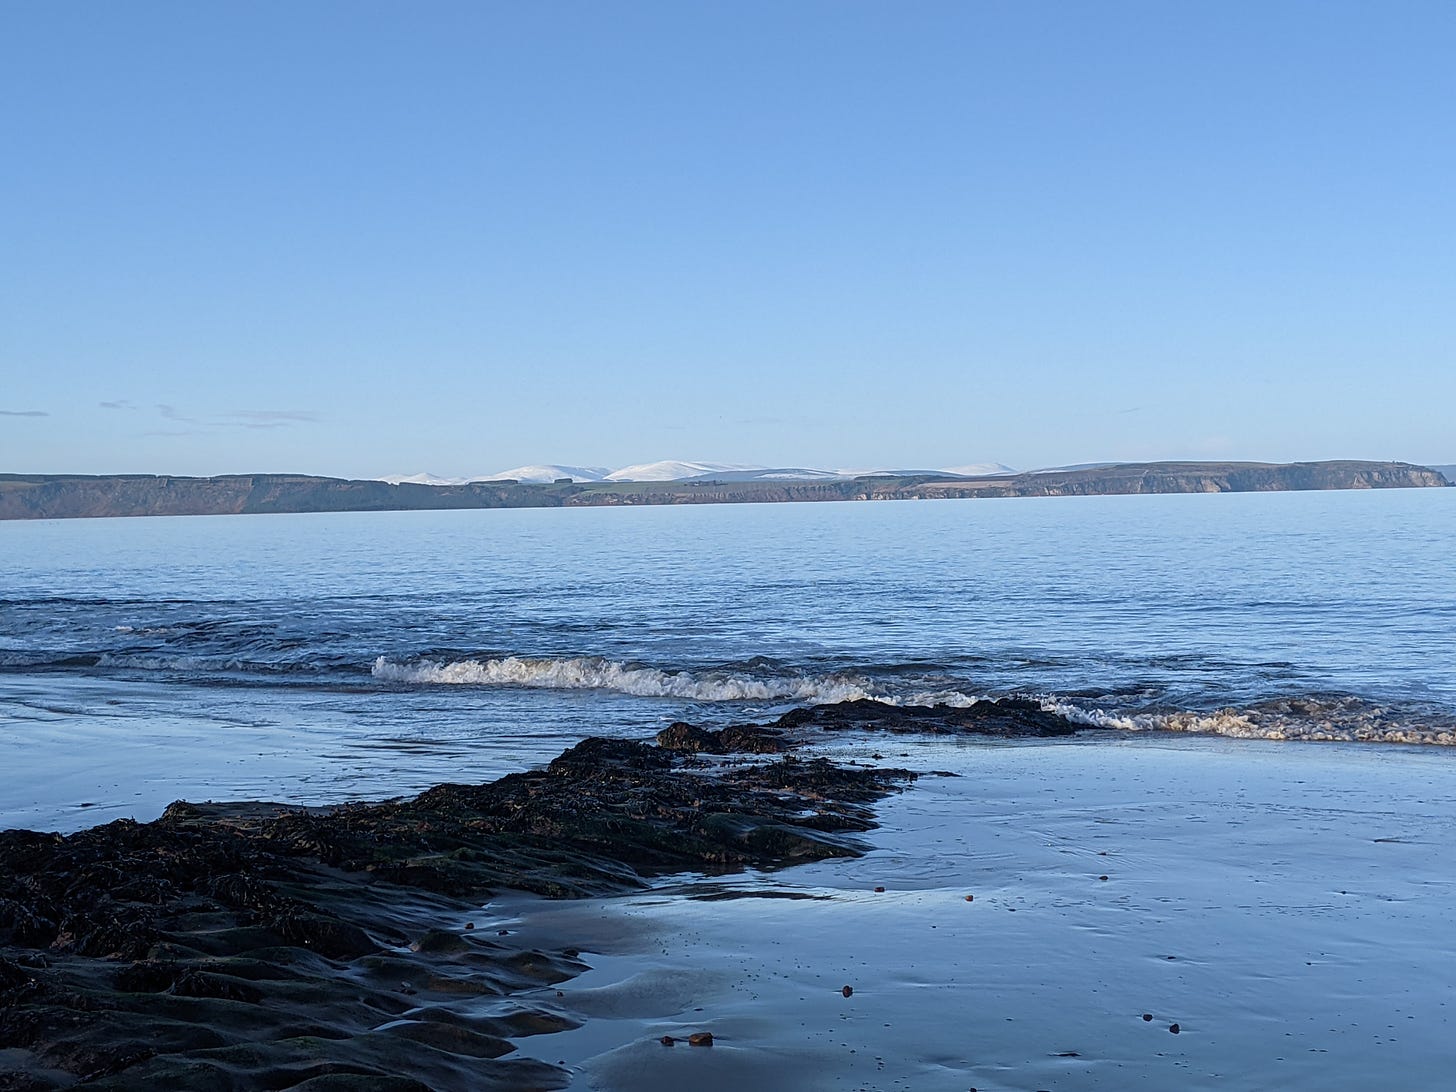 Seaweed on the rocks on the beach.  Flat blue water and snow capped hills in the distance